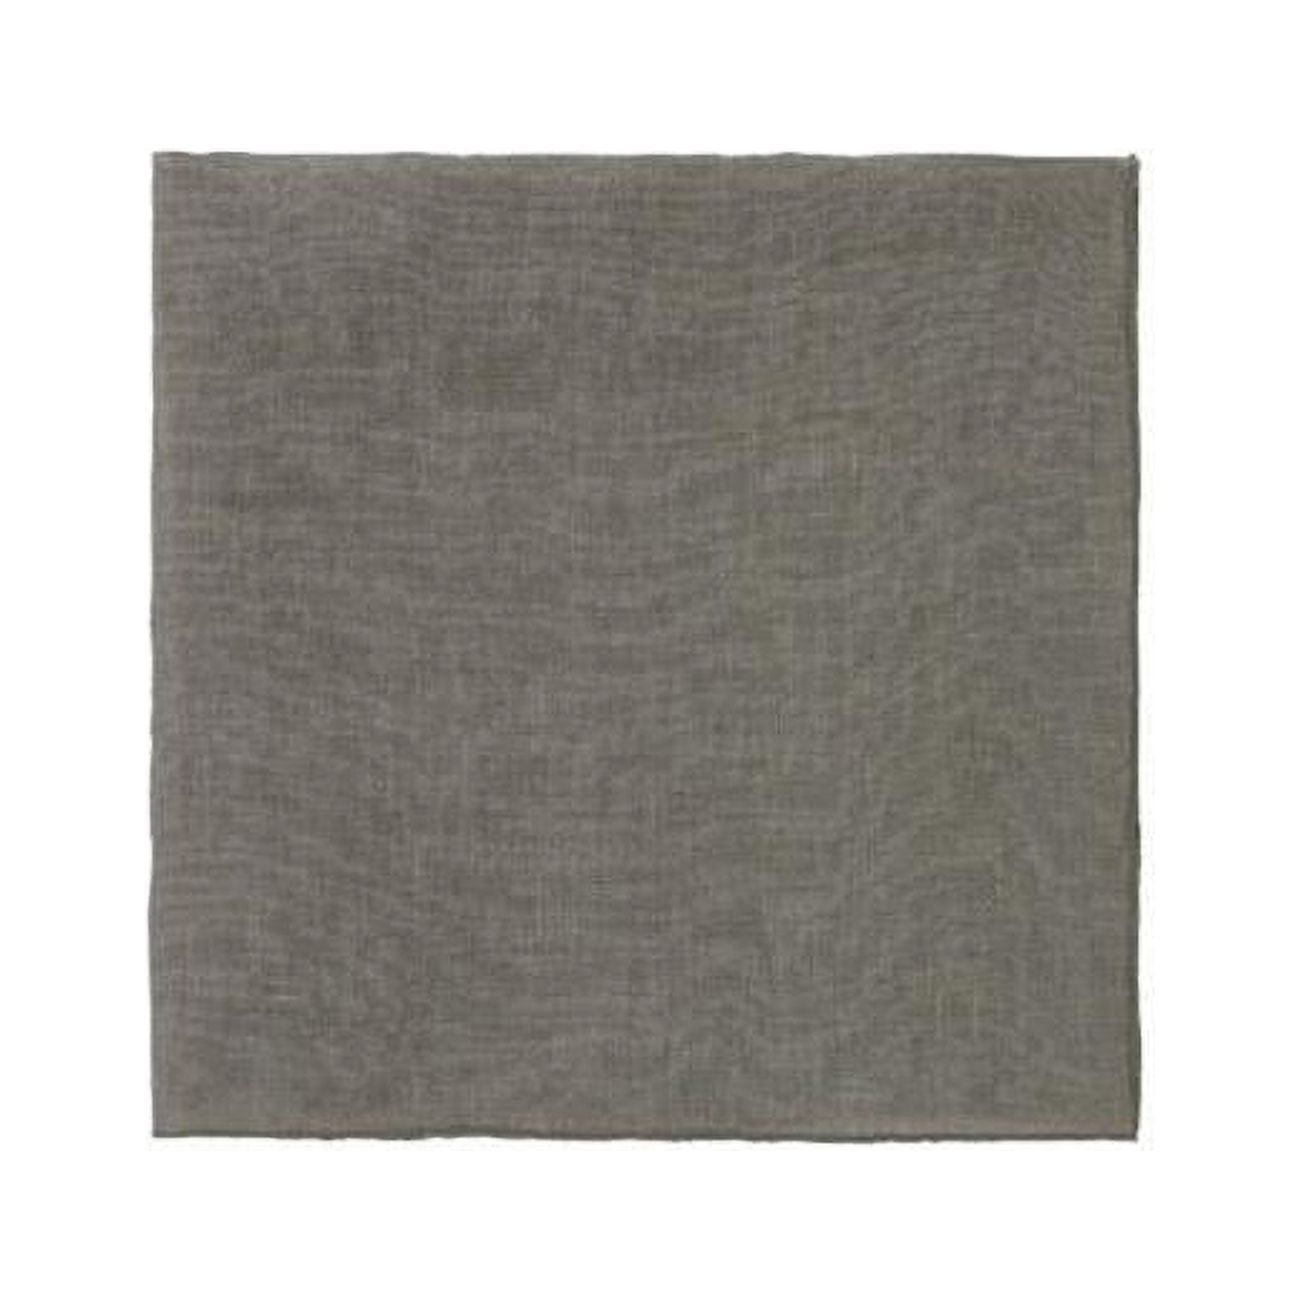 Picture of Blomus 63726.4 17 x 17 in. Lineo Linen Table Napkin, Agave Green - Set of 4